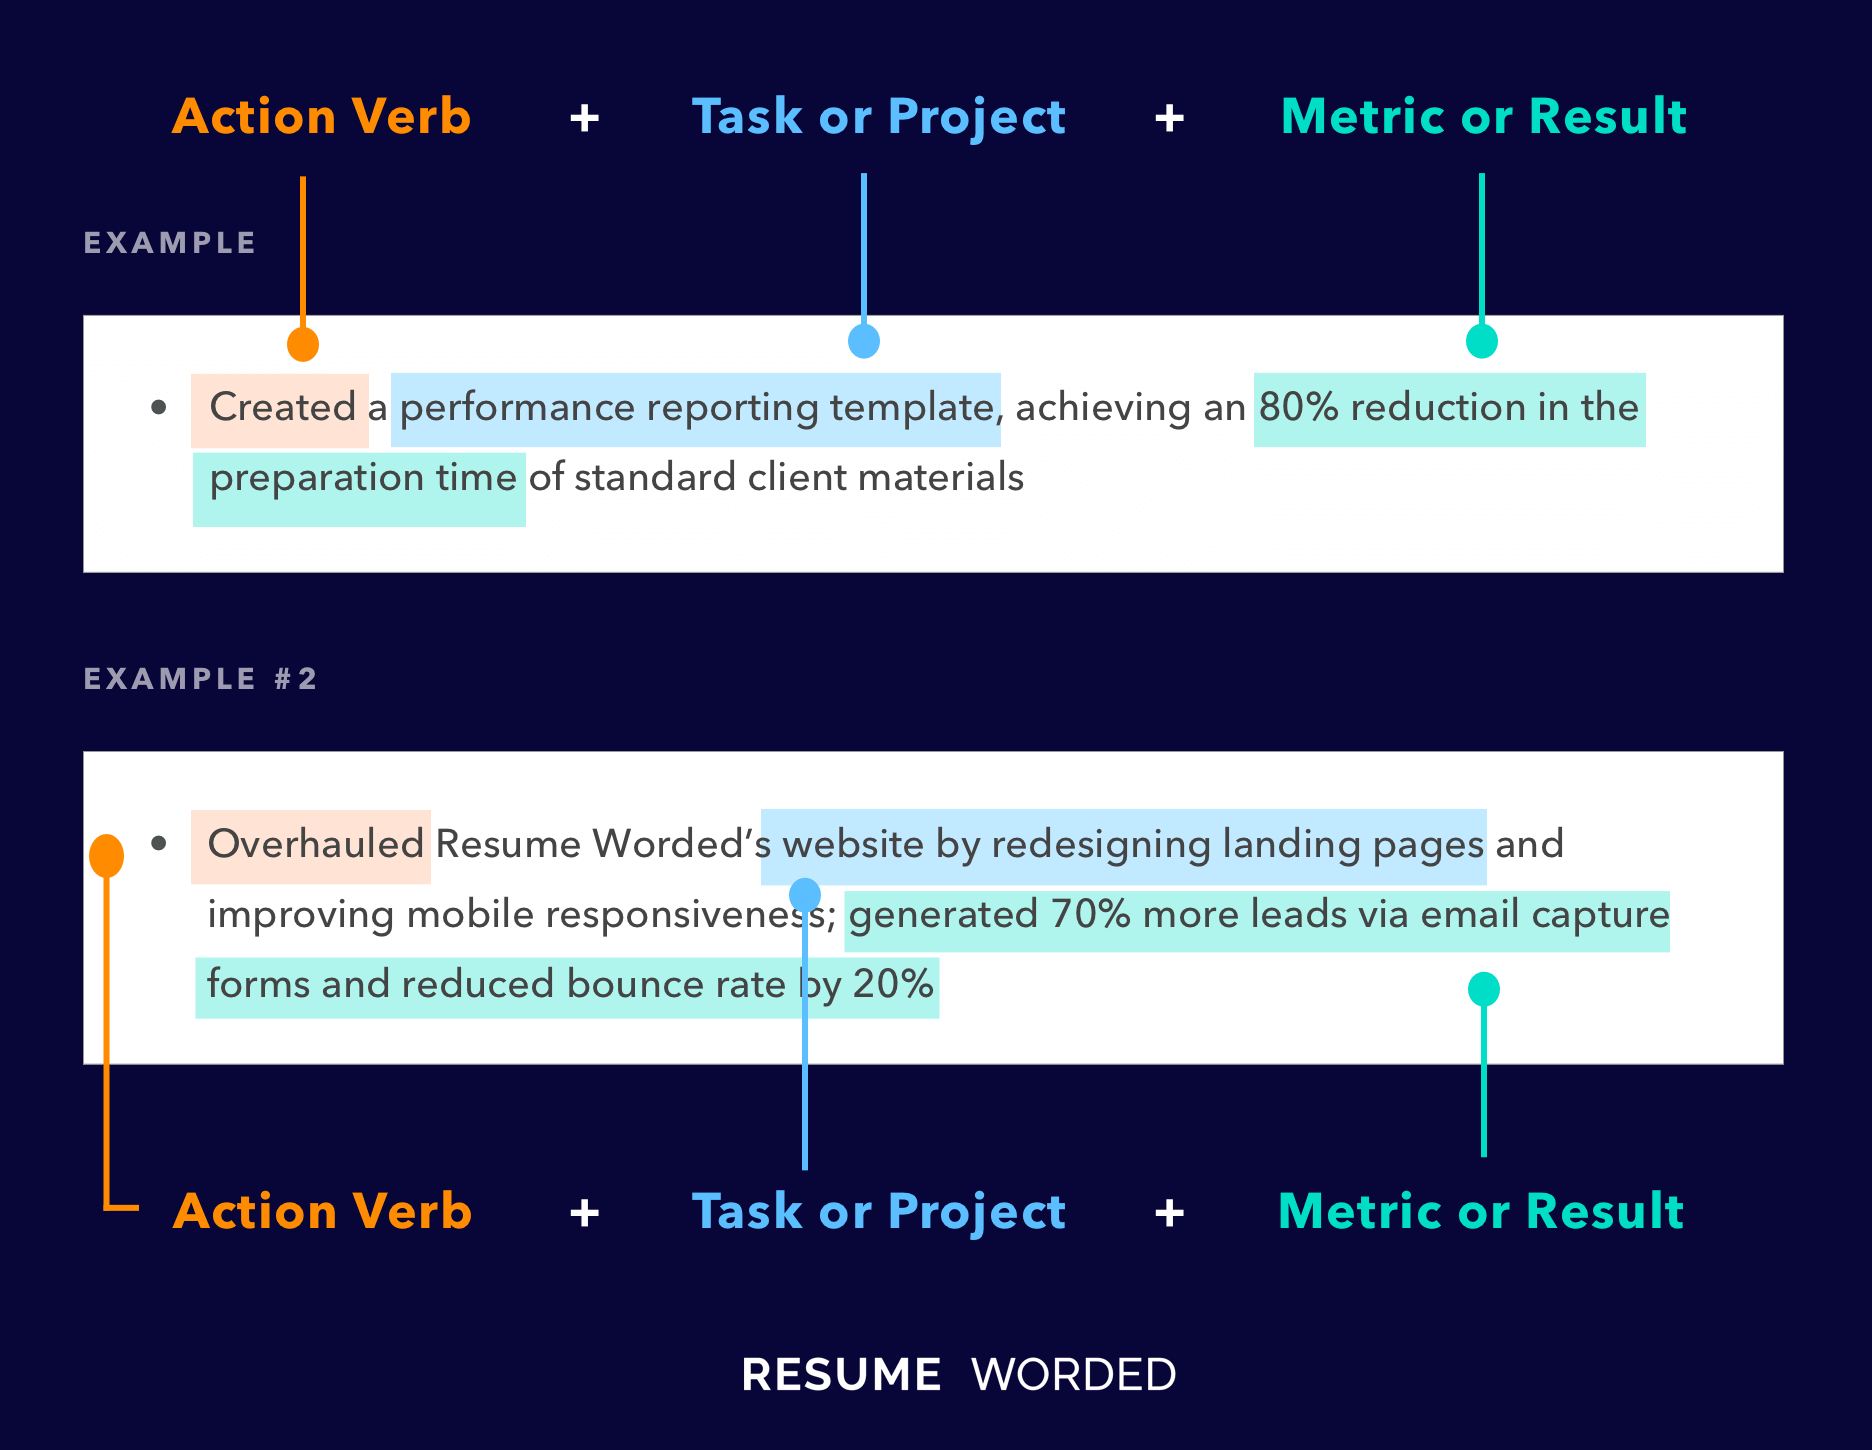 Breaks down bullet points and experience - Agile Scrum Master Resume